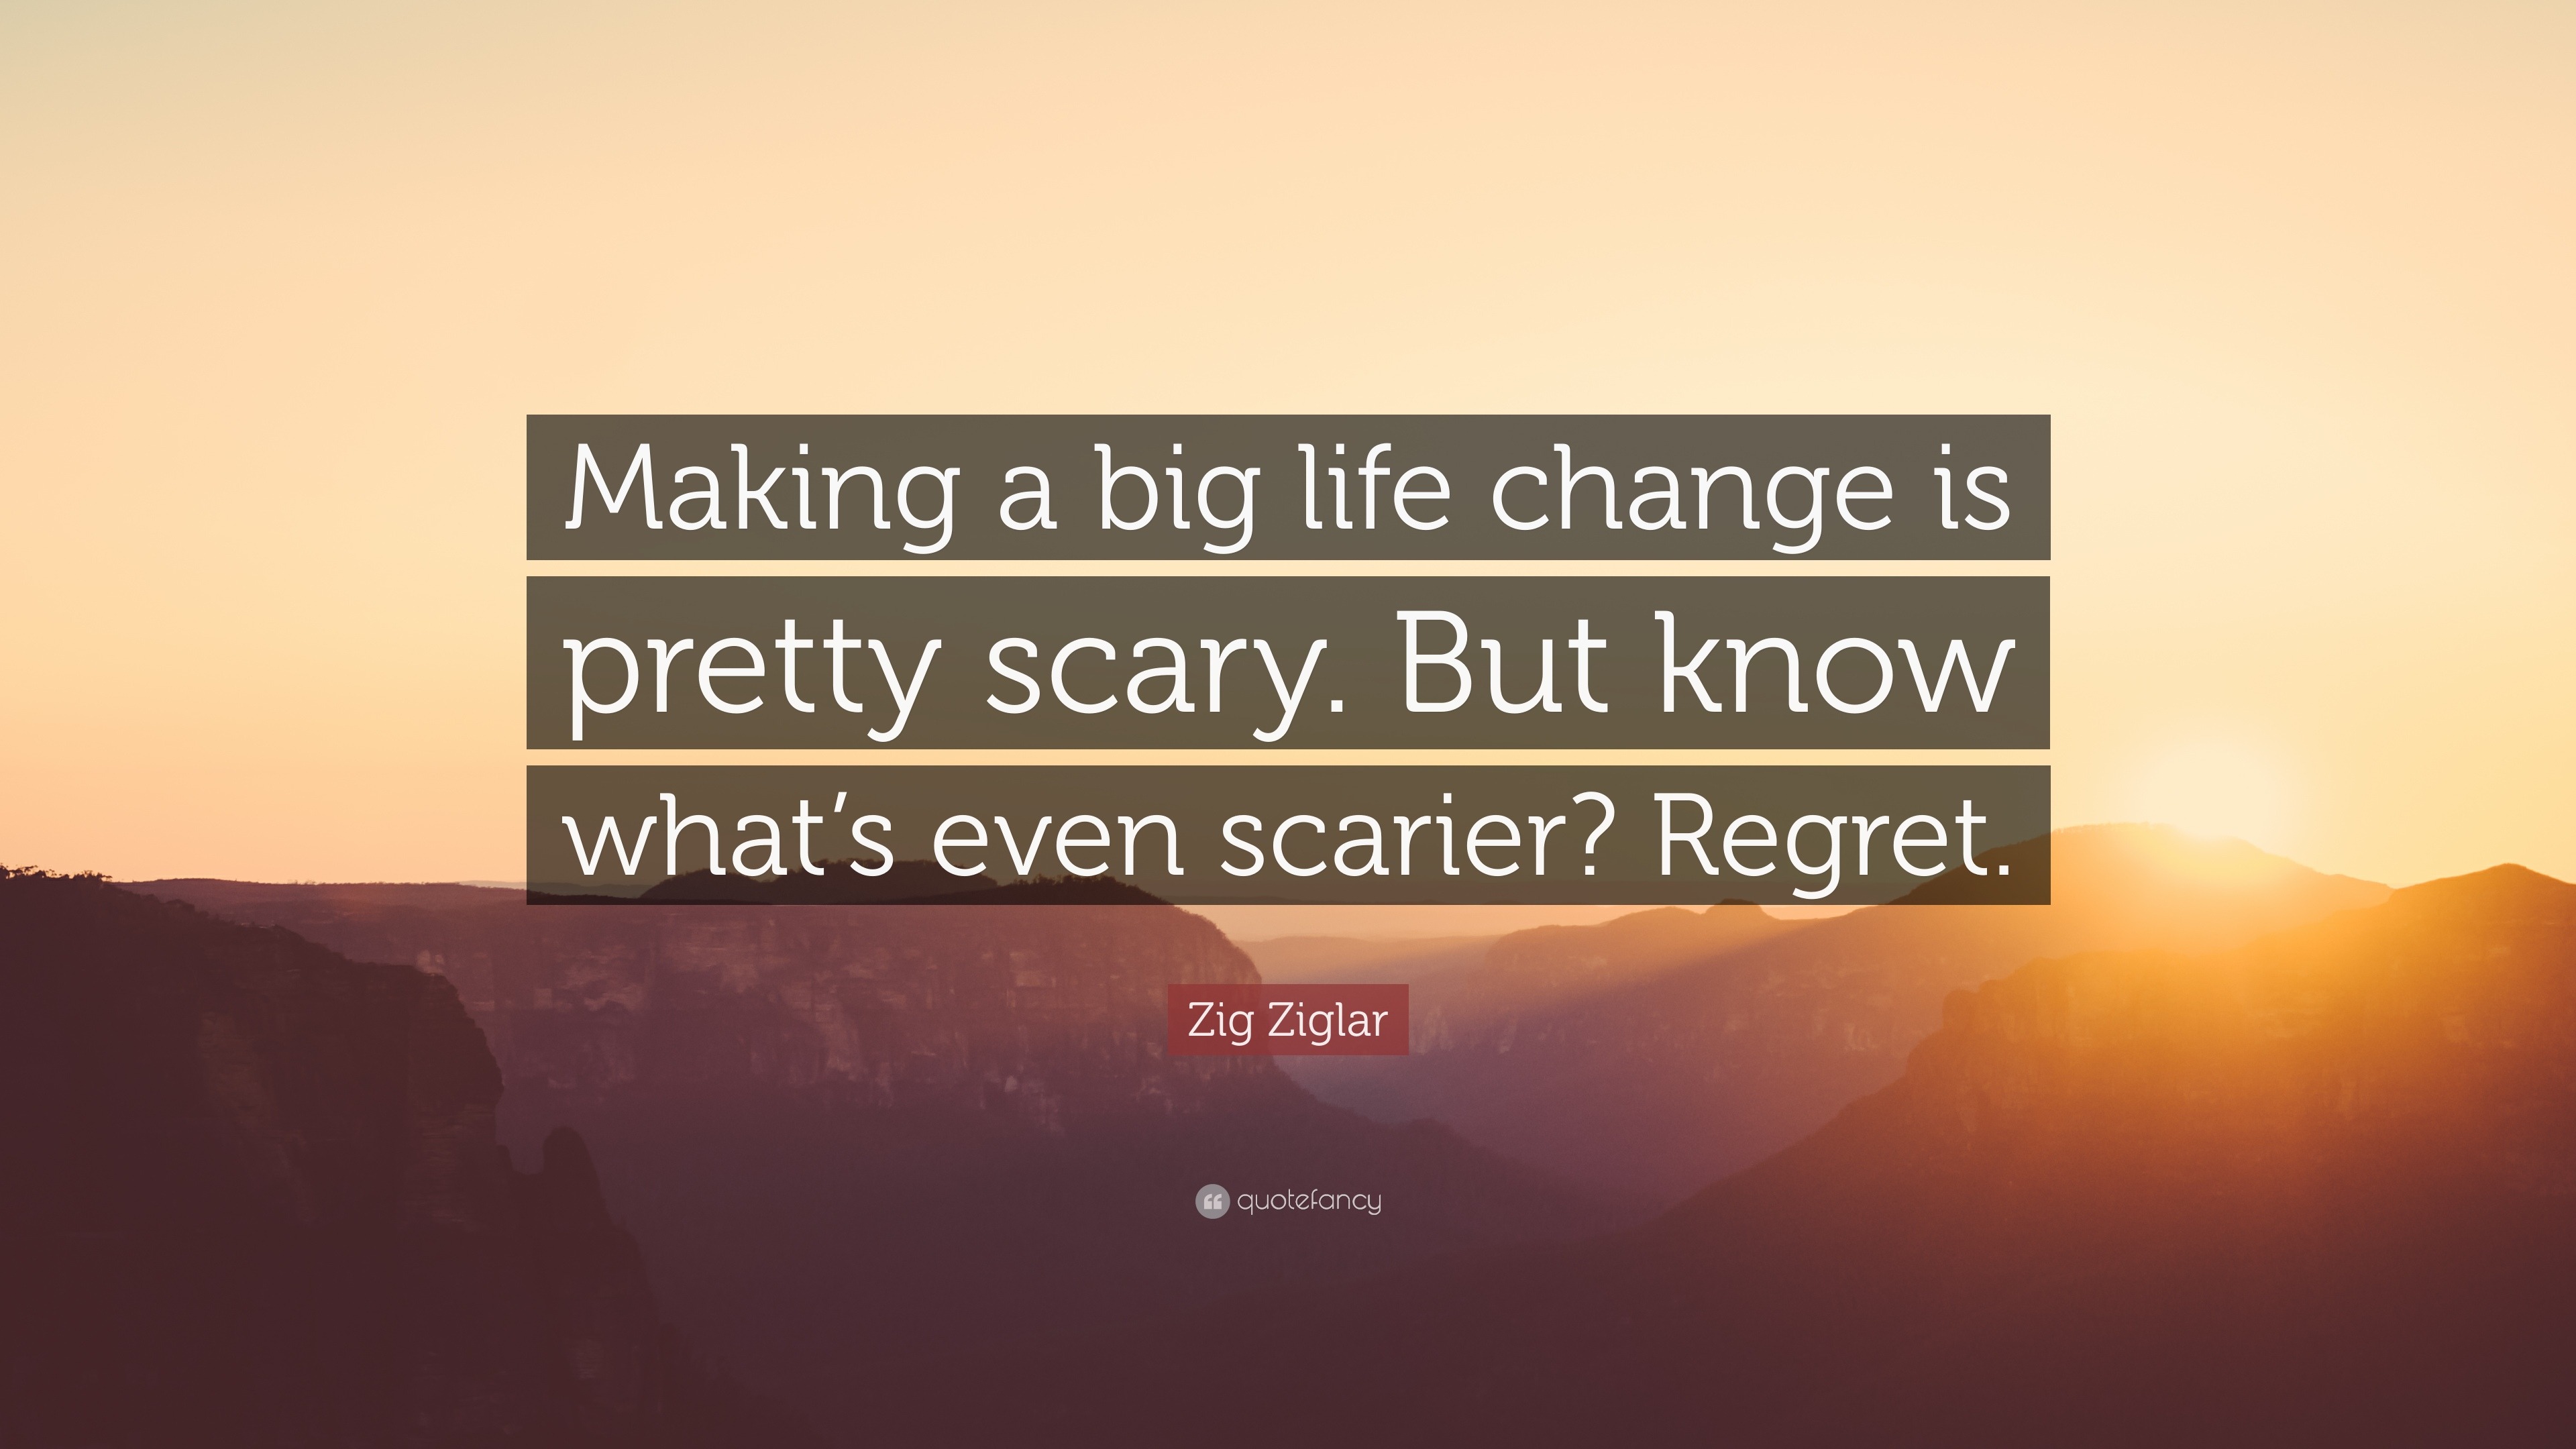 huge life changes quotes images